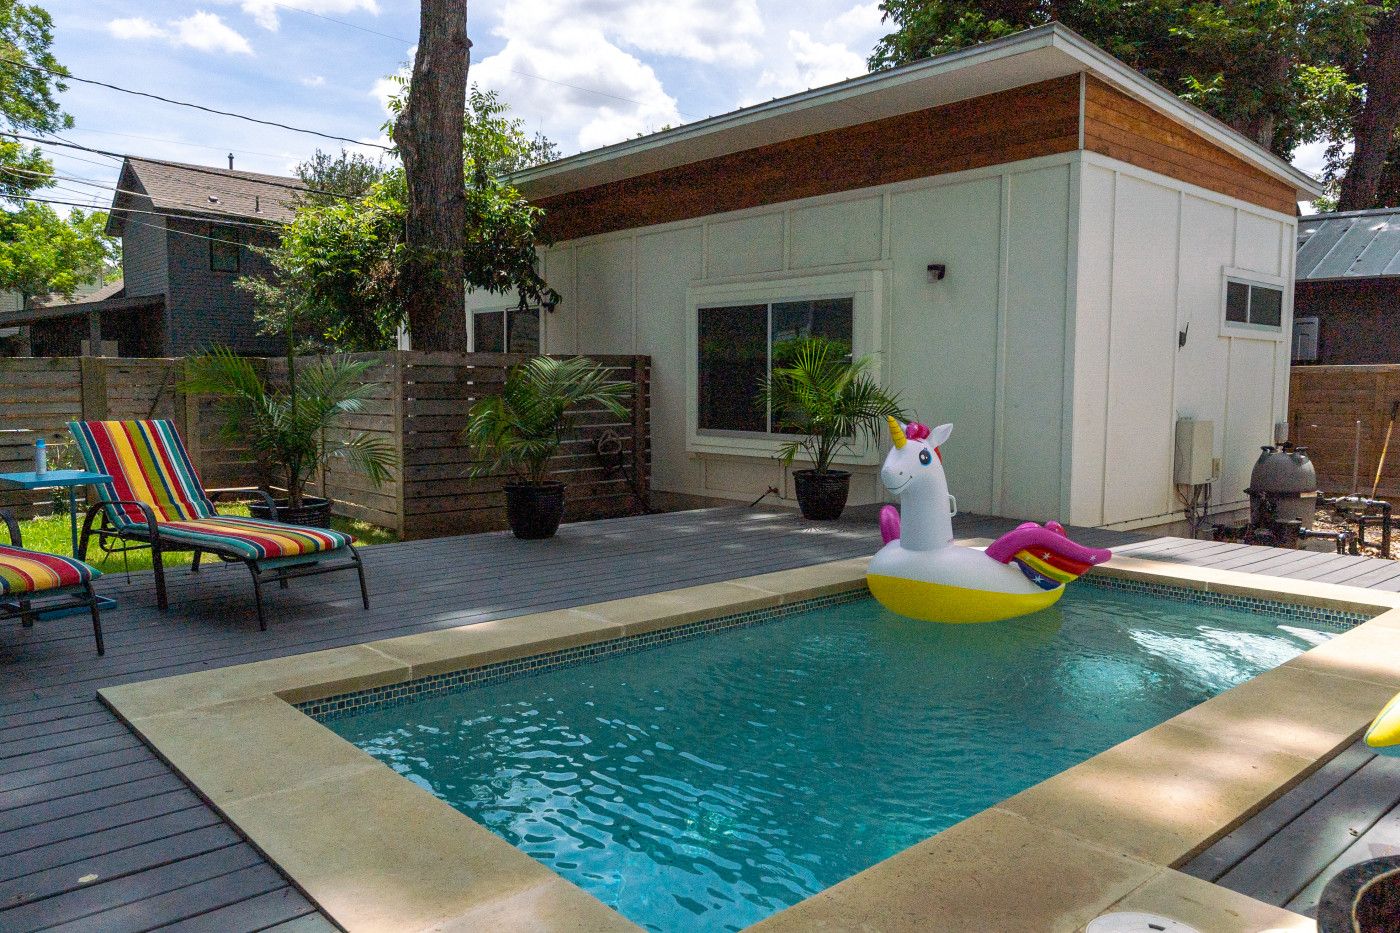 small plunge pool with a unicorn float